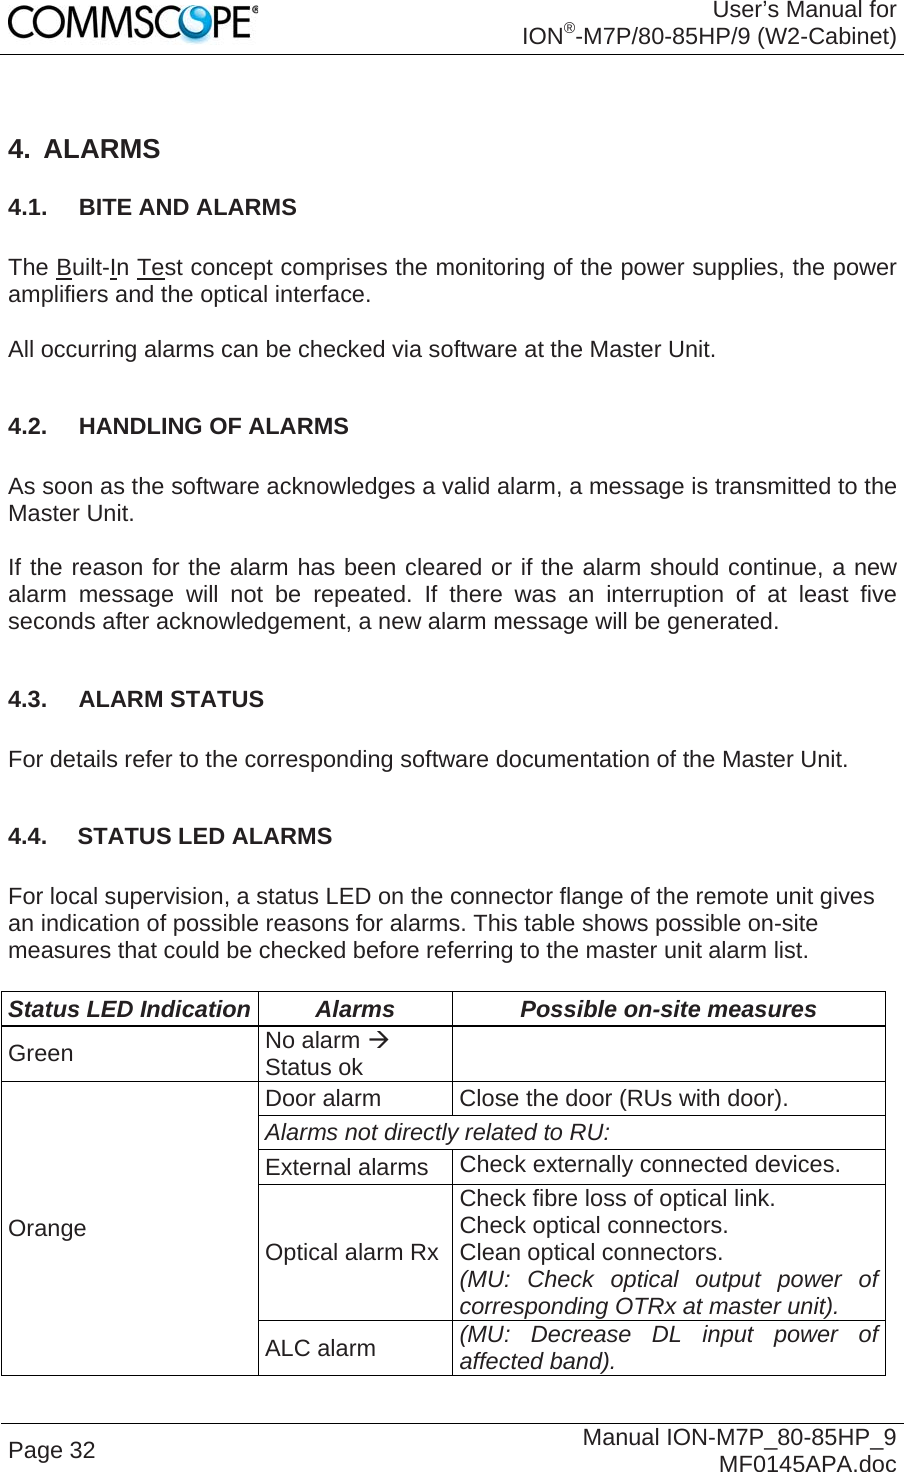 User’s Manual for ION®-M7P/80-85HP/9 (W2-Cabinet) Page 32  Manual ION-M7P_80-85HP_9 MF0145APA.doc  4. ALARMS 4.1.  BITE AND ALARMS  The Built-In Test concept comprises the monitoring of the power supplies, the power amplifiers and the optical interface.  All occurring alarms can be checked via software at the Master Unit.  4.2. HANDLING OF ALARMS  As soon as the software acknowledges a valid alarm, a message is transmitted to the Master Unit.  If the reason for the alarm has been cleared or if the alarm should continue, a new alarm message will not be repeated. If there was an interruption of at least five seconds after acknowledgement, a new alarm message will be generated.  4.3. ALARM STATUS  For details refer to the corresponding software documentation of the Master Unit.  4.4.  STATUS LED ALARMS  For local supervision, a status LED on the connector flange of the remote unit gives an indication of possible reasons for alarms. This table shows possible on-site measures that could be checked before referring to the master unit alarm list.  Status LED Indication  Alarms  Possible on-site measures Green  No alarm  Status ok   Orange Door alarm  Close the door (RUs with door). Alarms not directly related to RU:  External alarms  Check externally connected devices. Optical alarm Rx Check fibre loss of optical link. Check optical connectors. Clean optical connectors. (MU: Check optical output power of corresponding OTRx at master unit). ALC alarm  (MU: Decrease DL input power of affected band). 